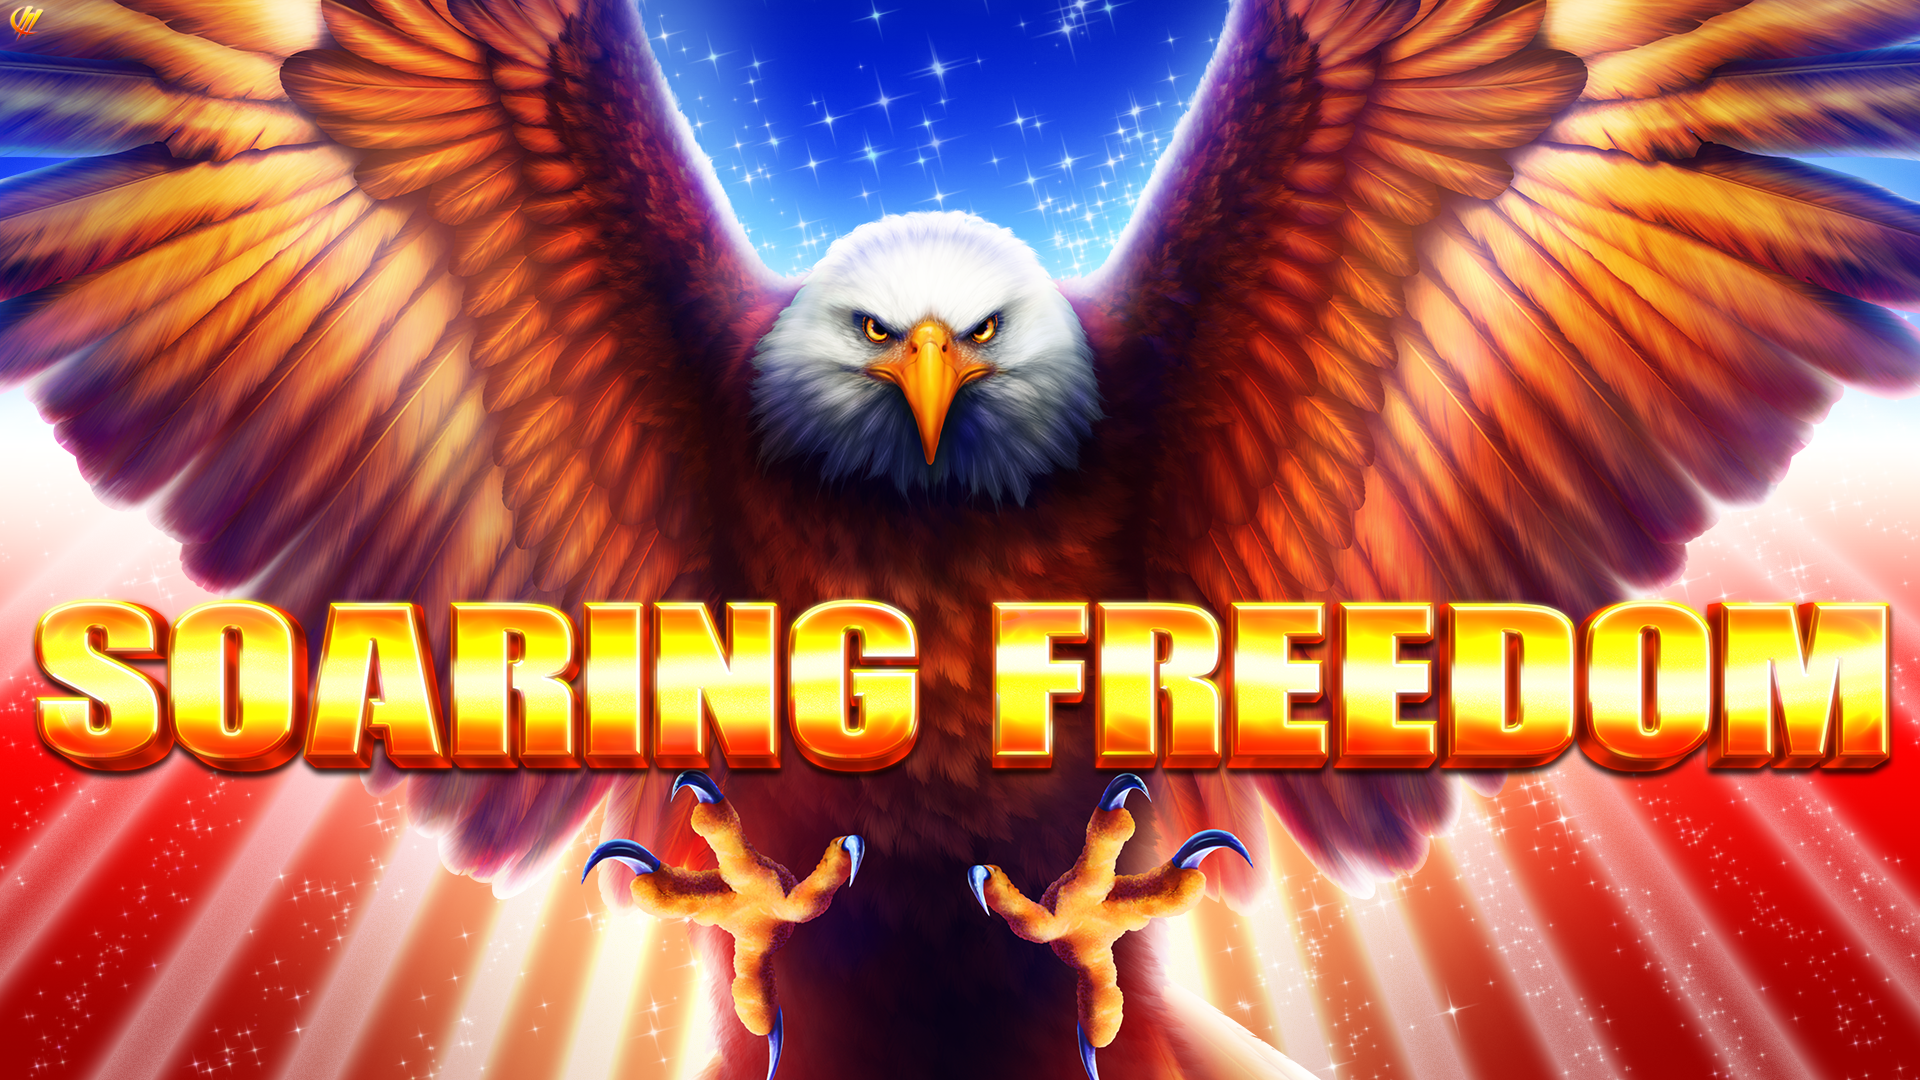 Picture for Soaring Freedom